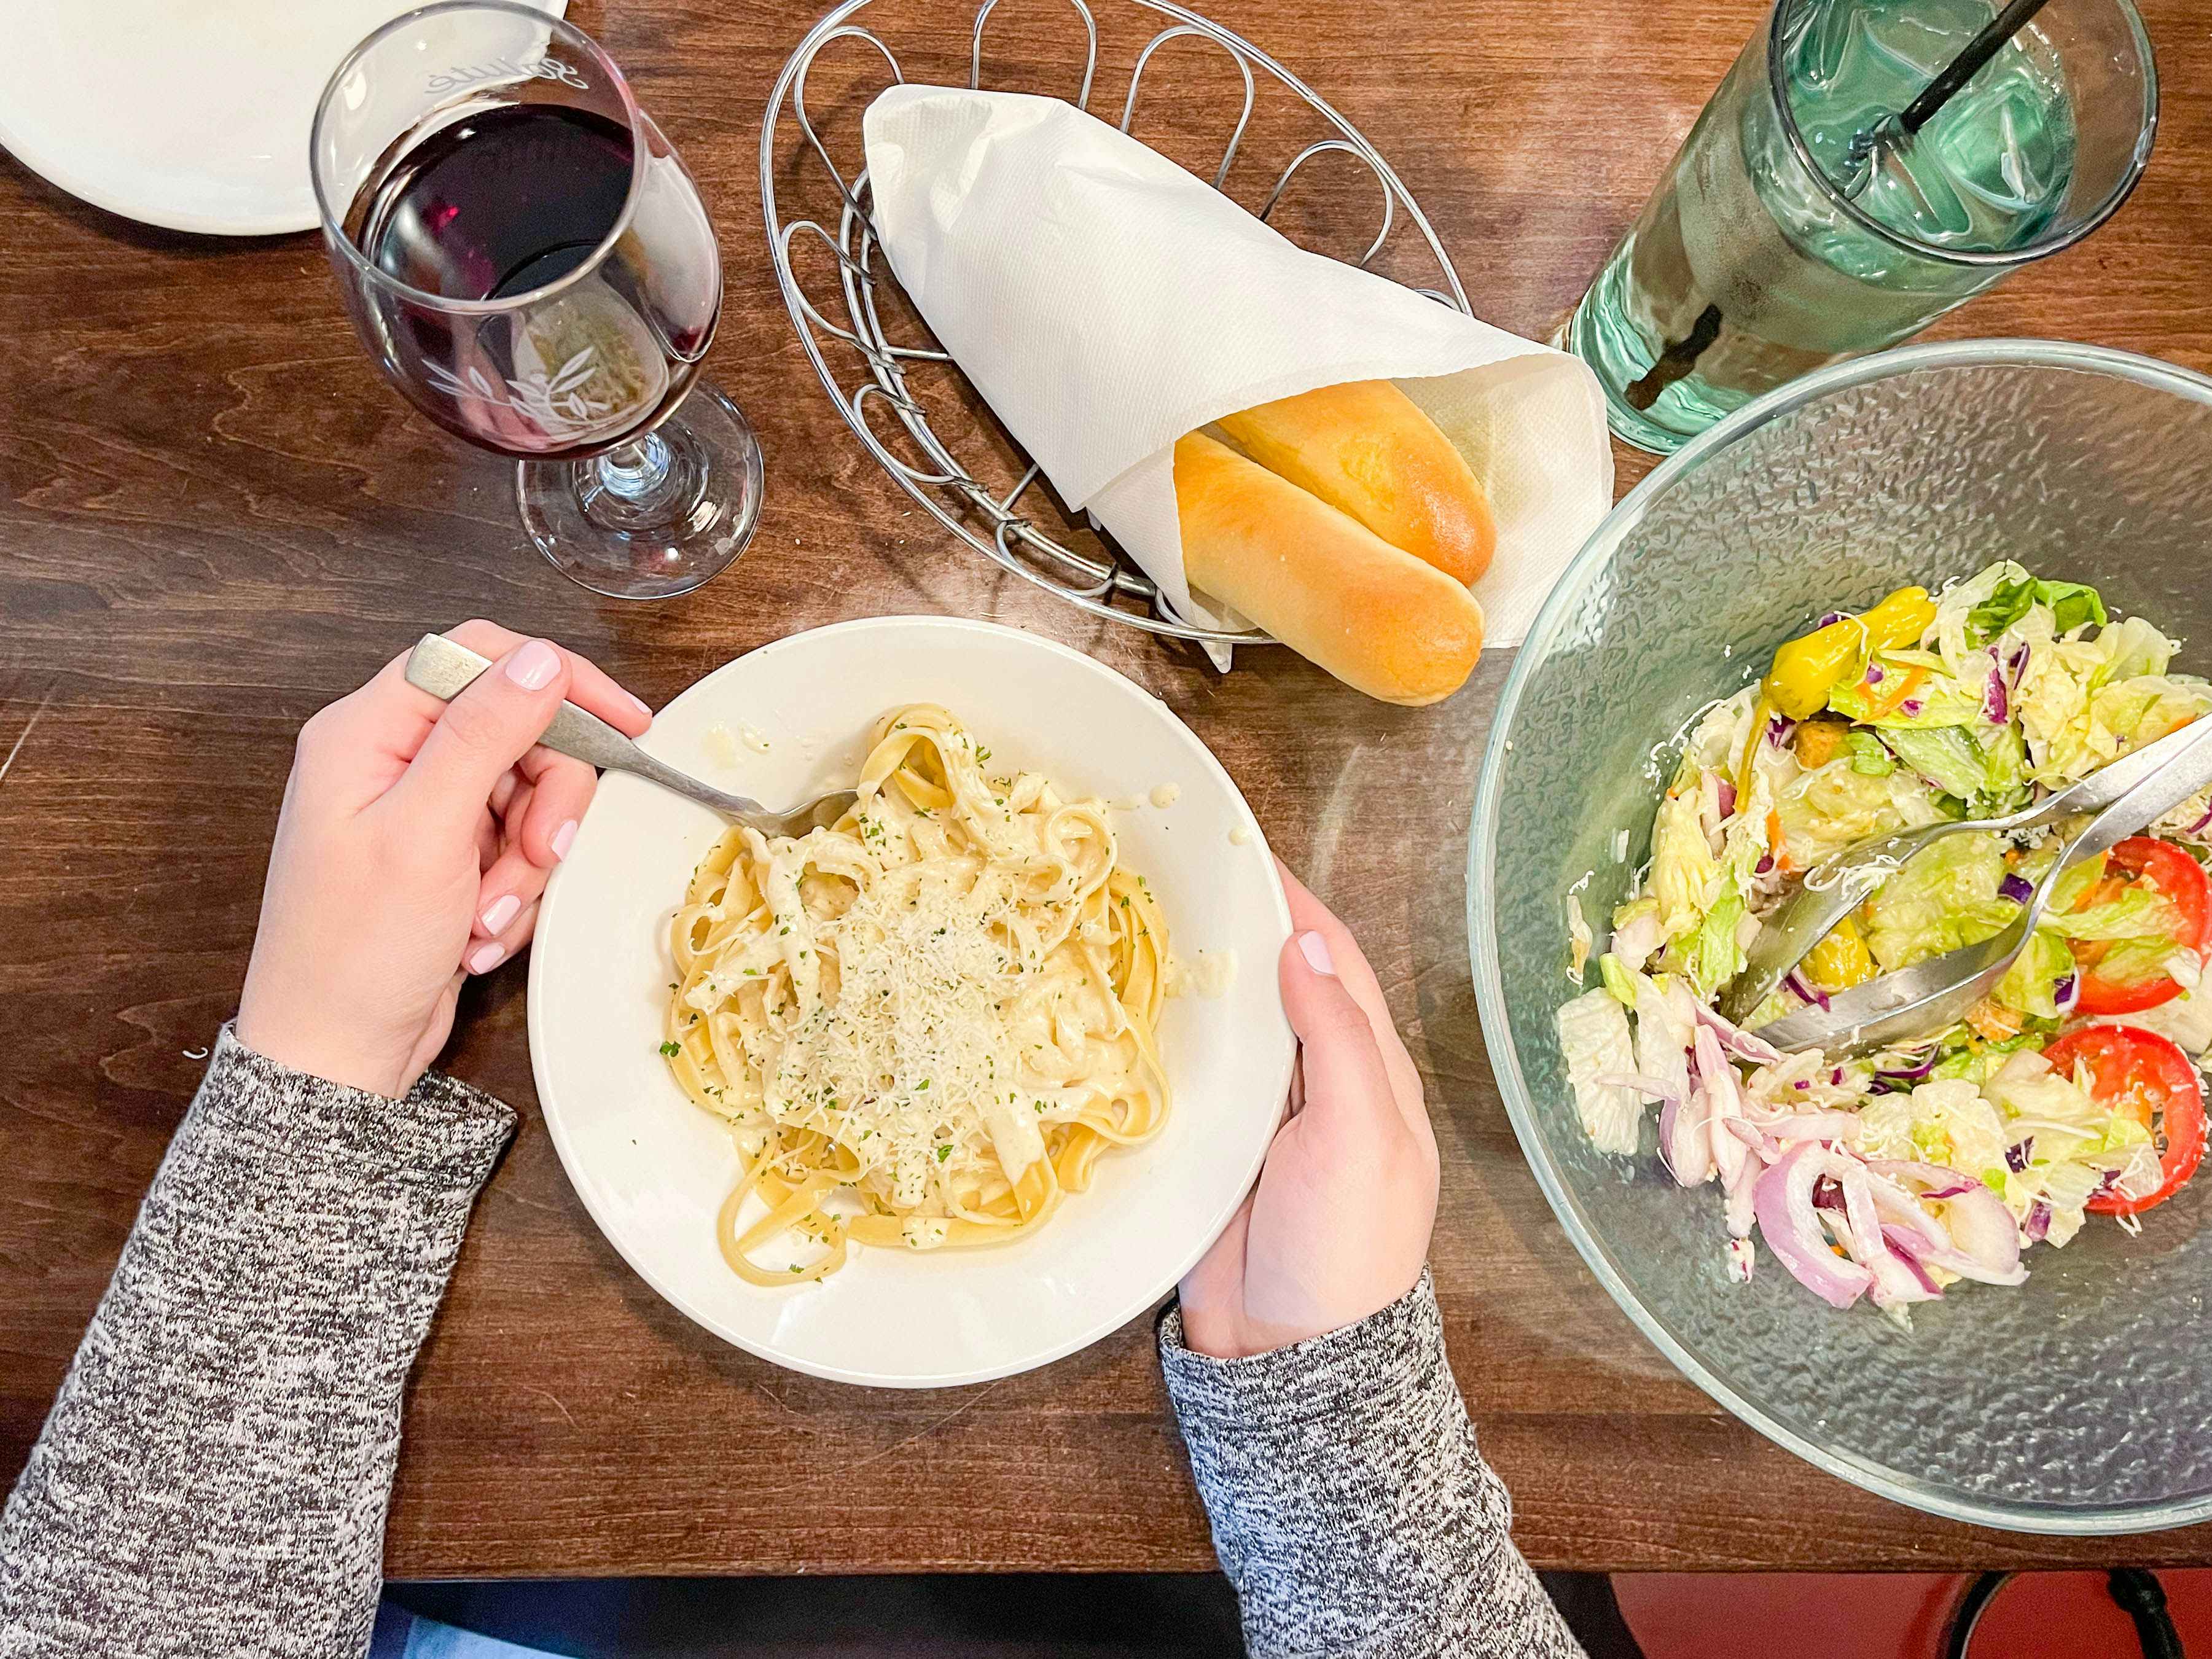 A person sitting at Olive Garden with a bowl of pasta, a bowl of salad, a basket of breadsticks, and a glass of wine on the table in front of them.